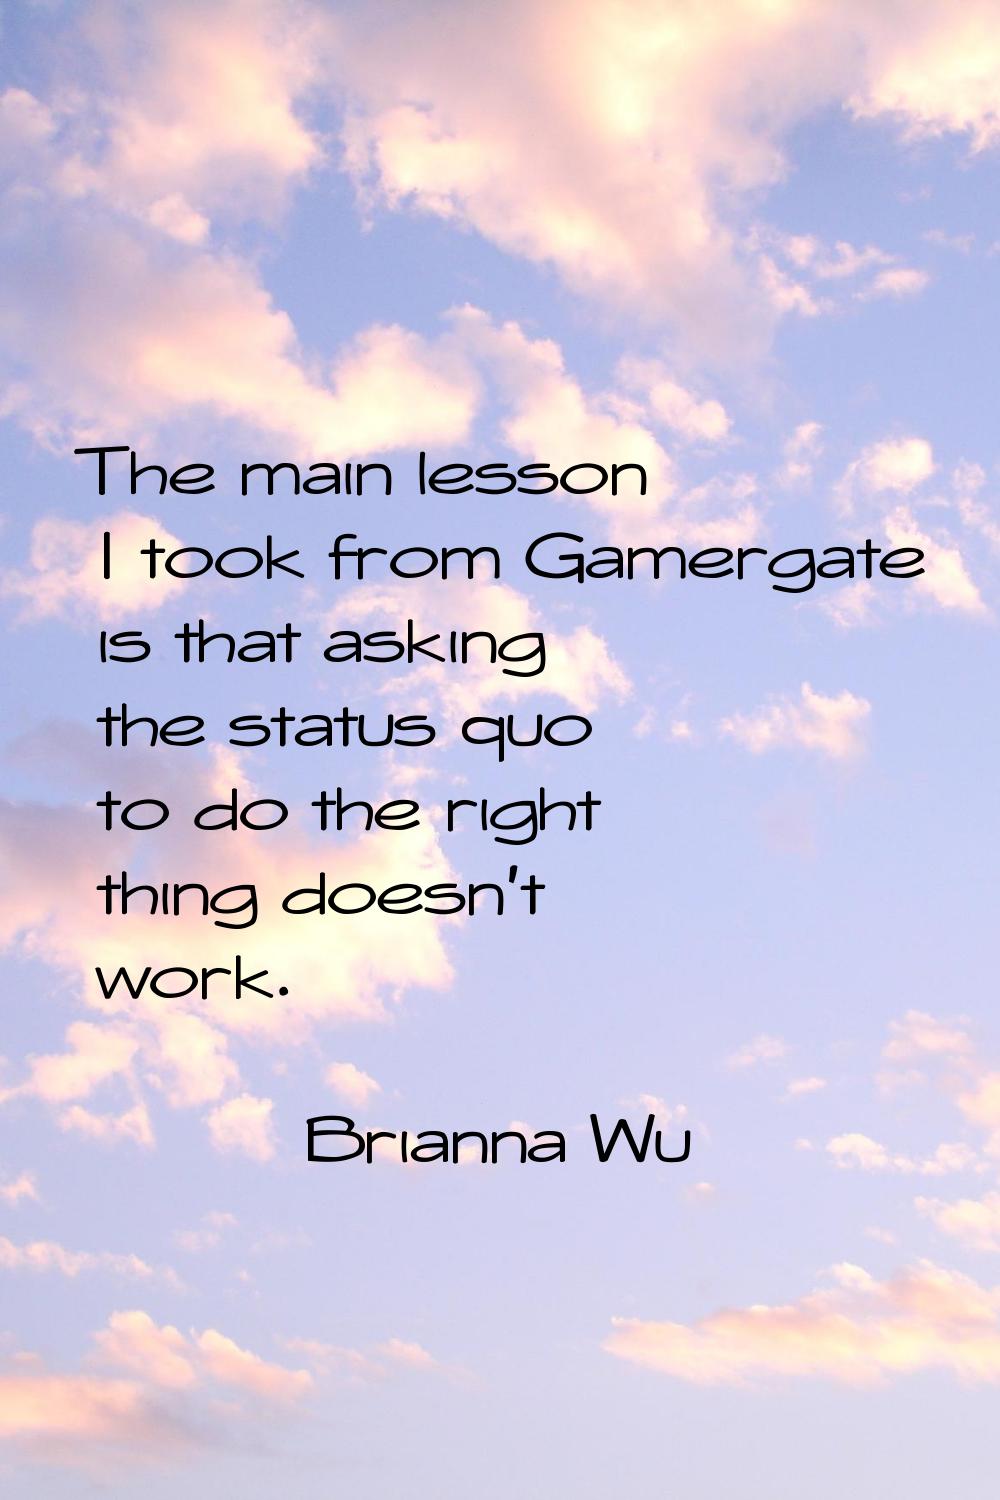 The main lesson I took from Gamergate is that asking the status quo to do the right thing doesn't w